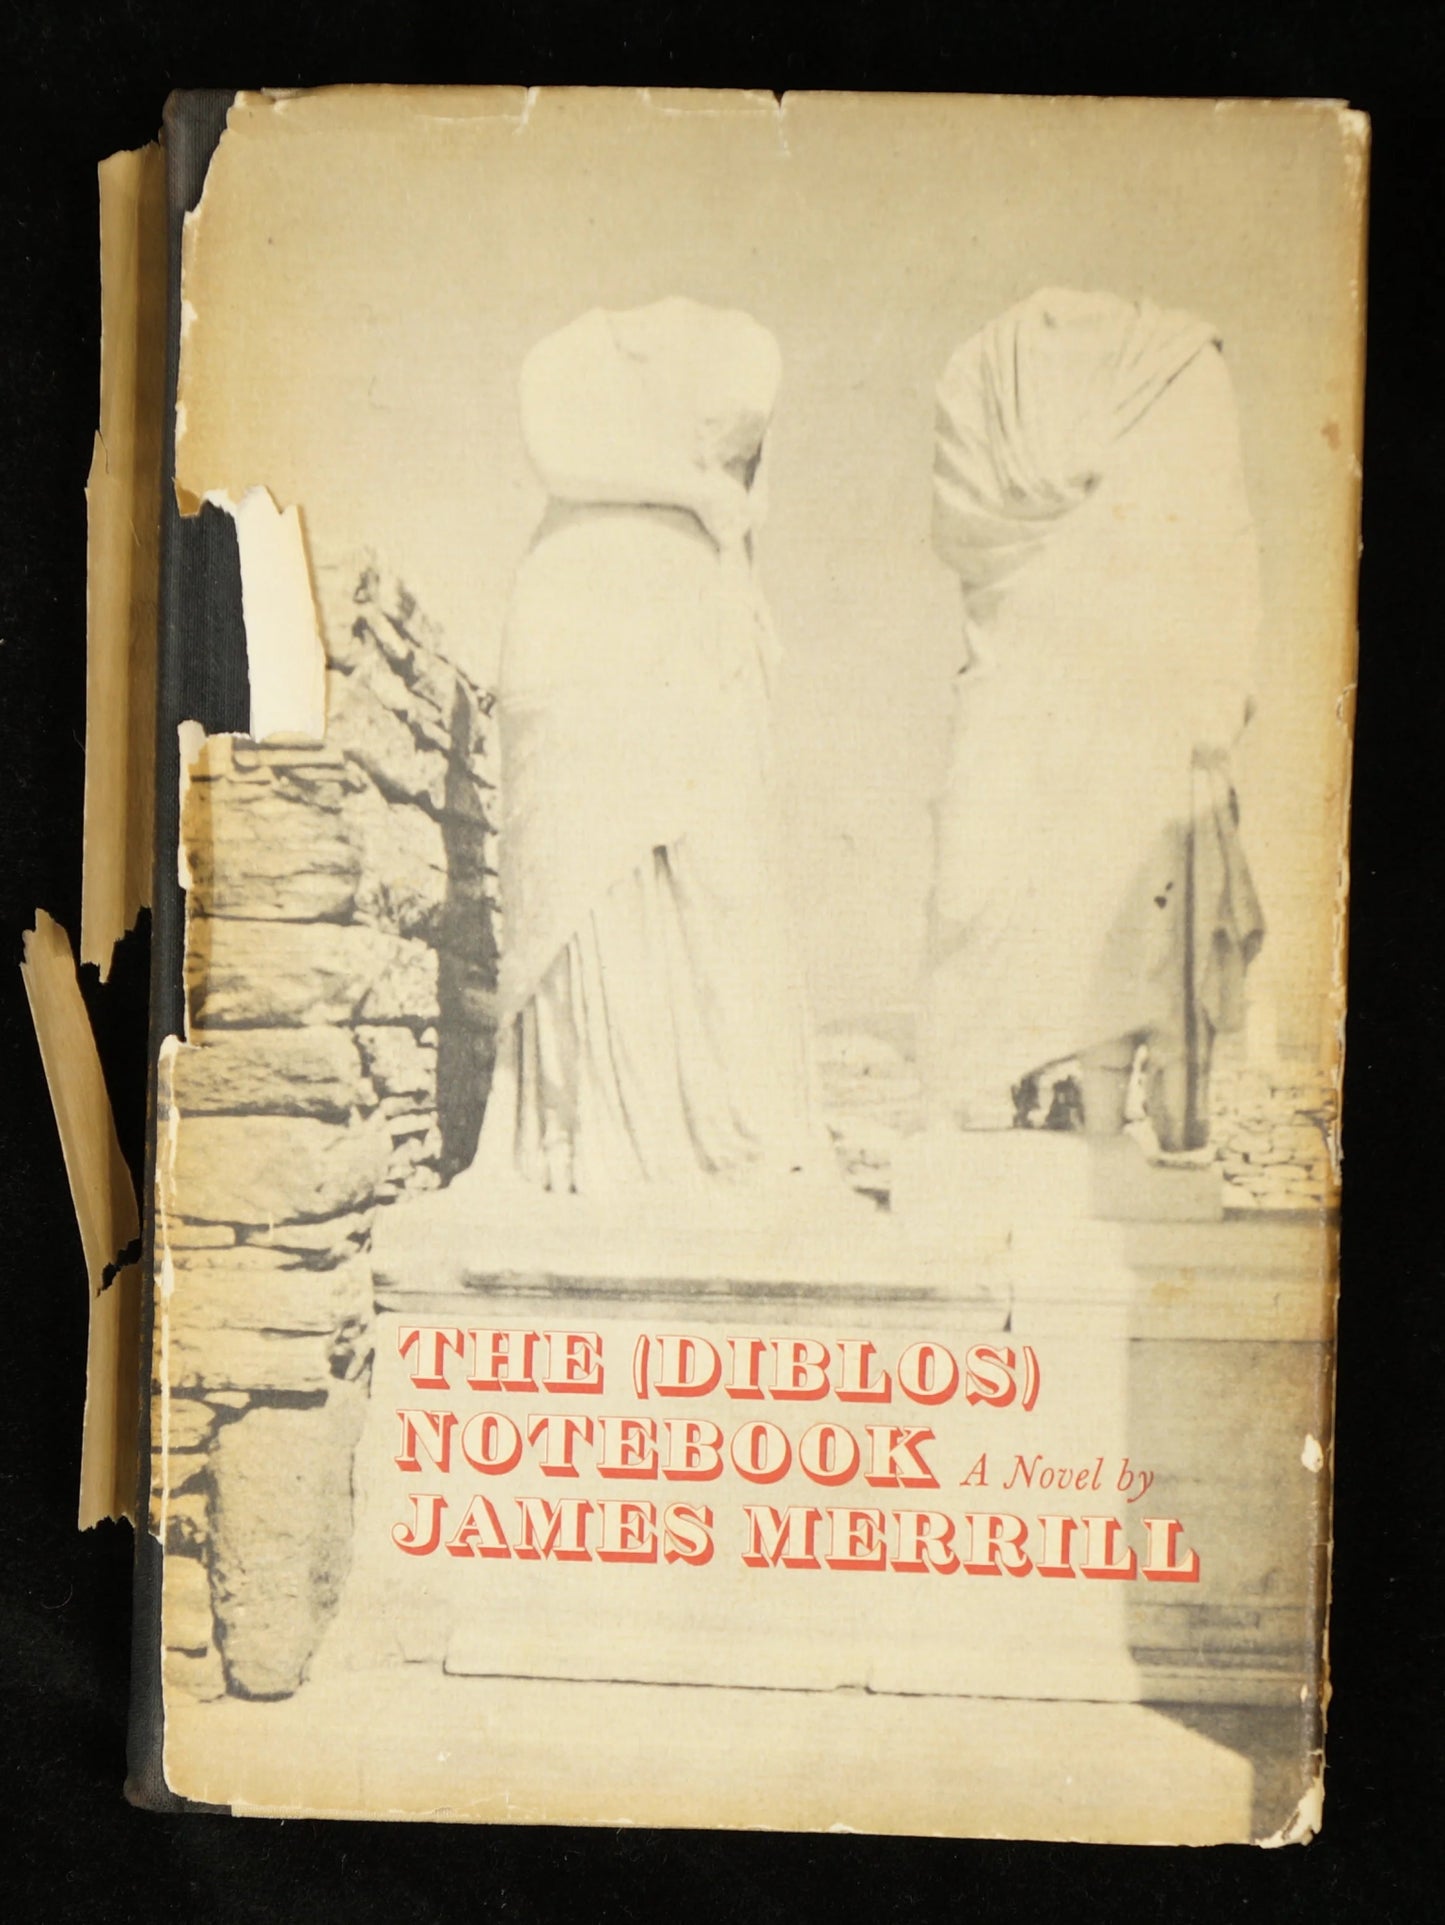 The (Diblos) Notebook: James Merrill, First Edition - 1965 - Bear and Raven Antiques